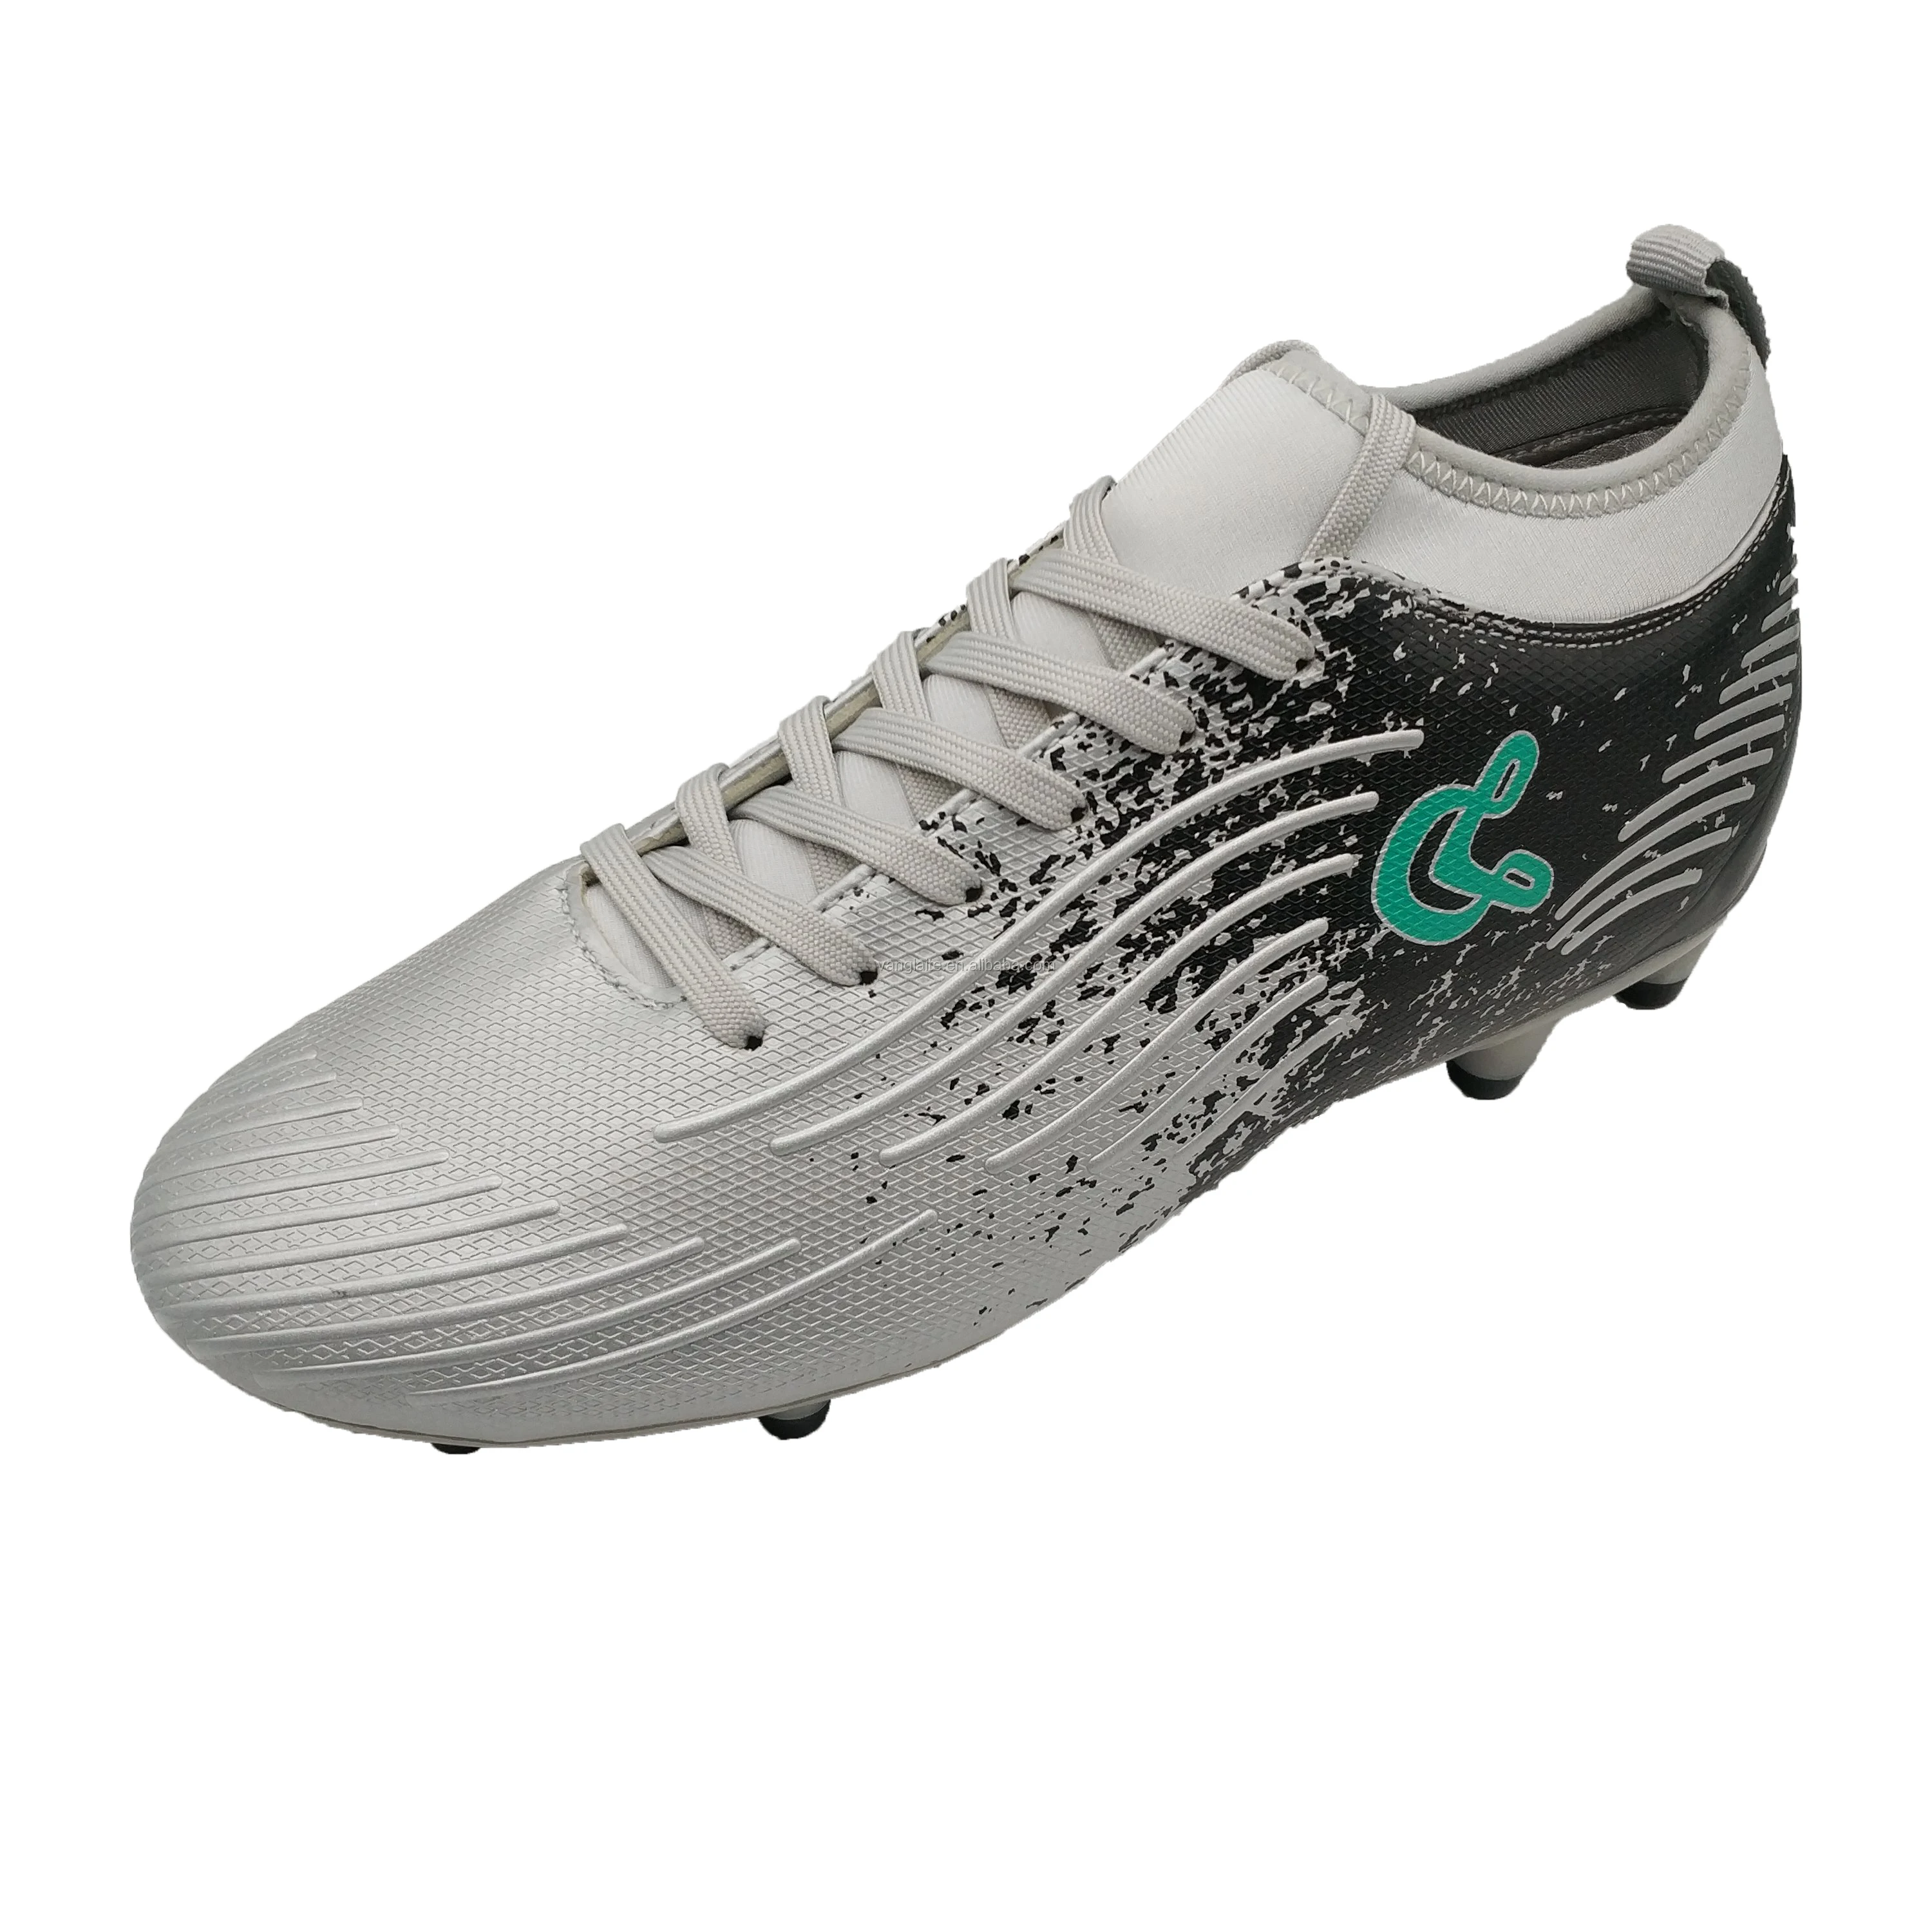 Indoor Soccer Boots Football Men Shoes For Sale